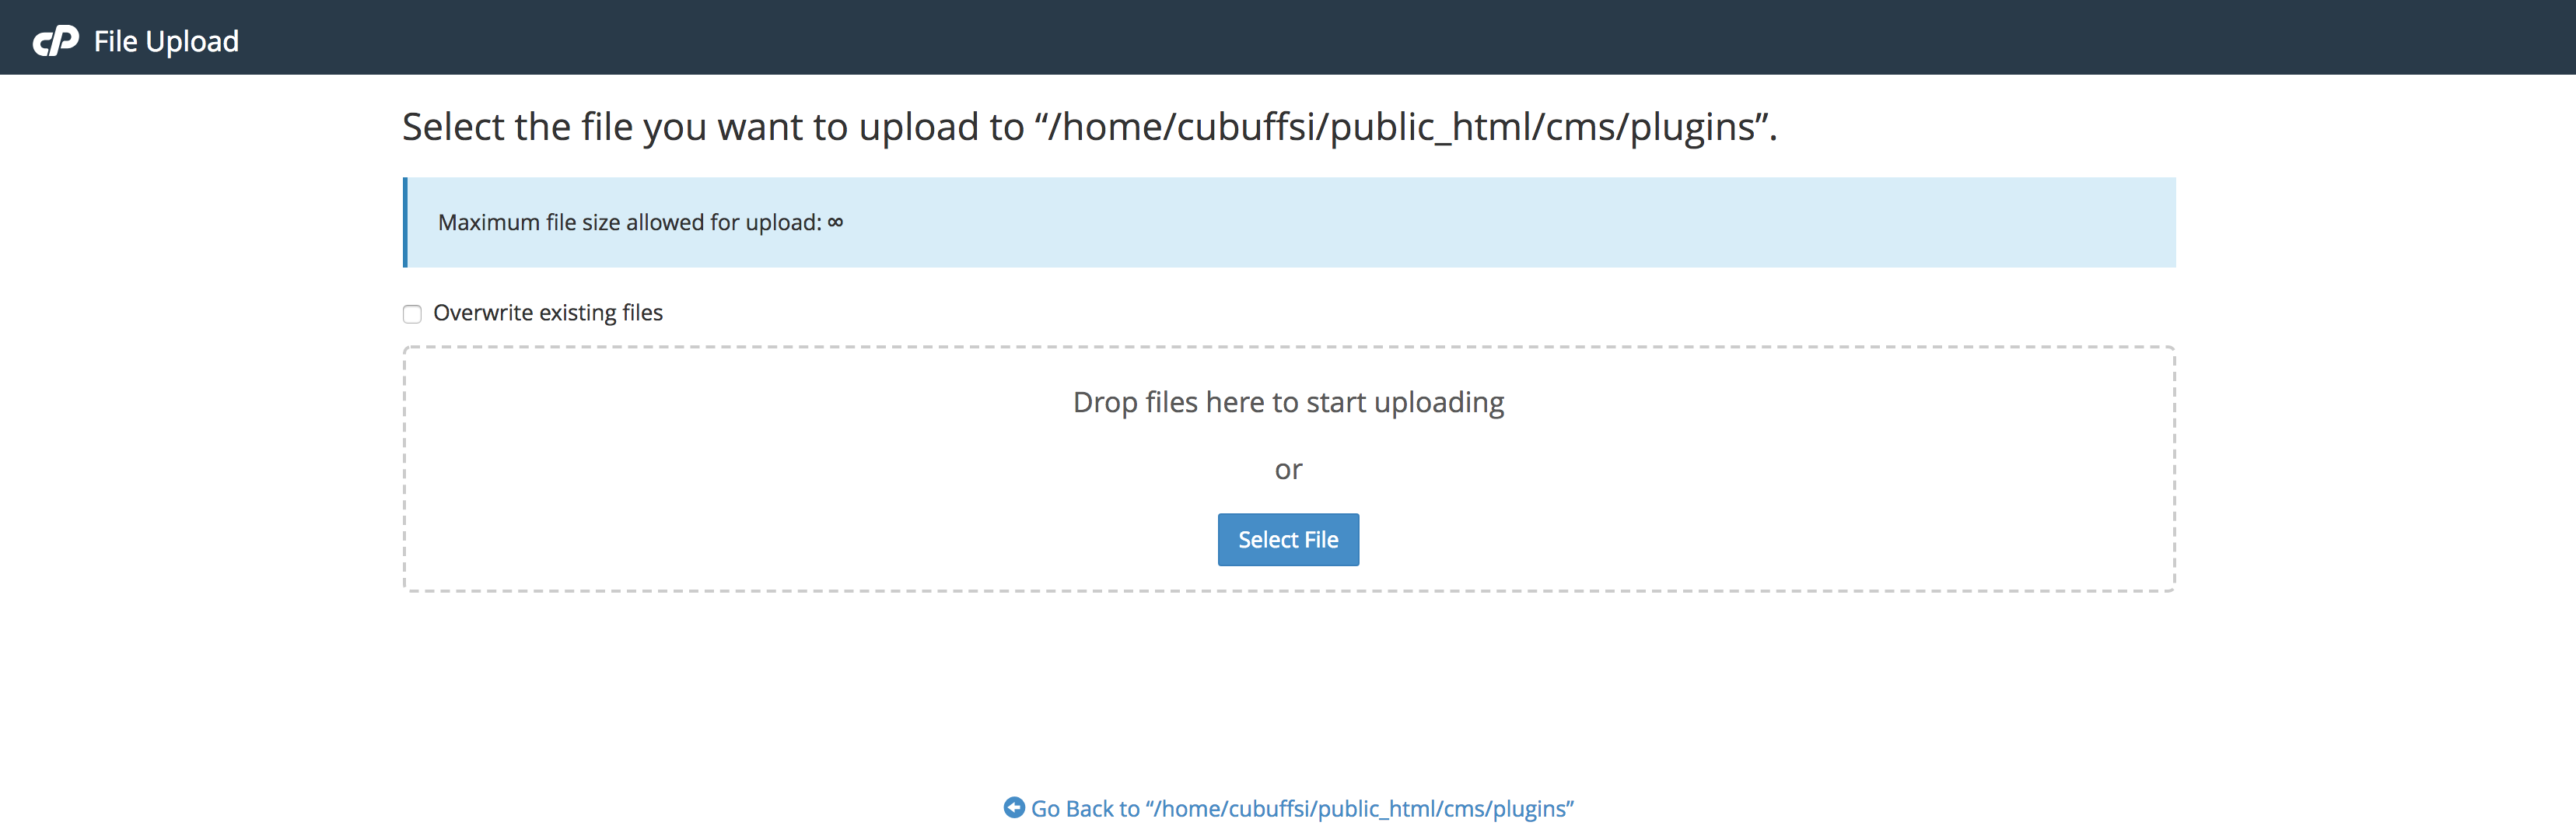 upload screen for file manager